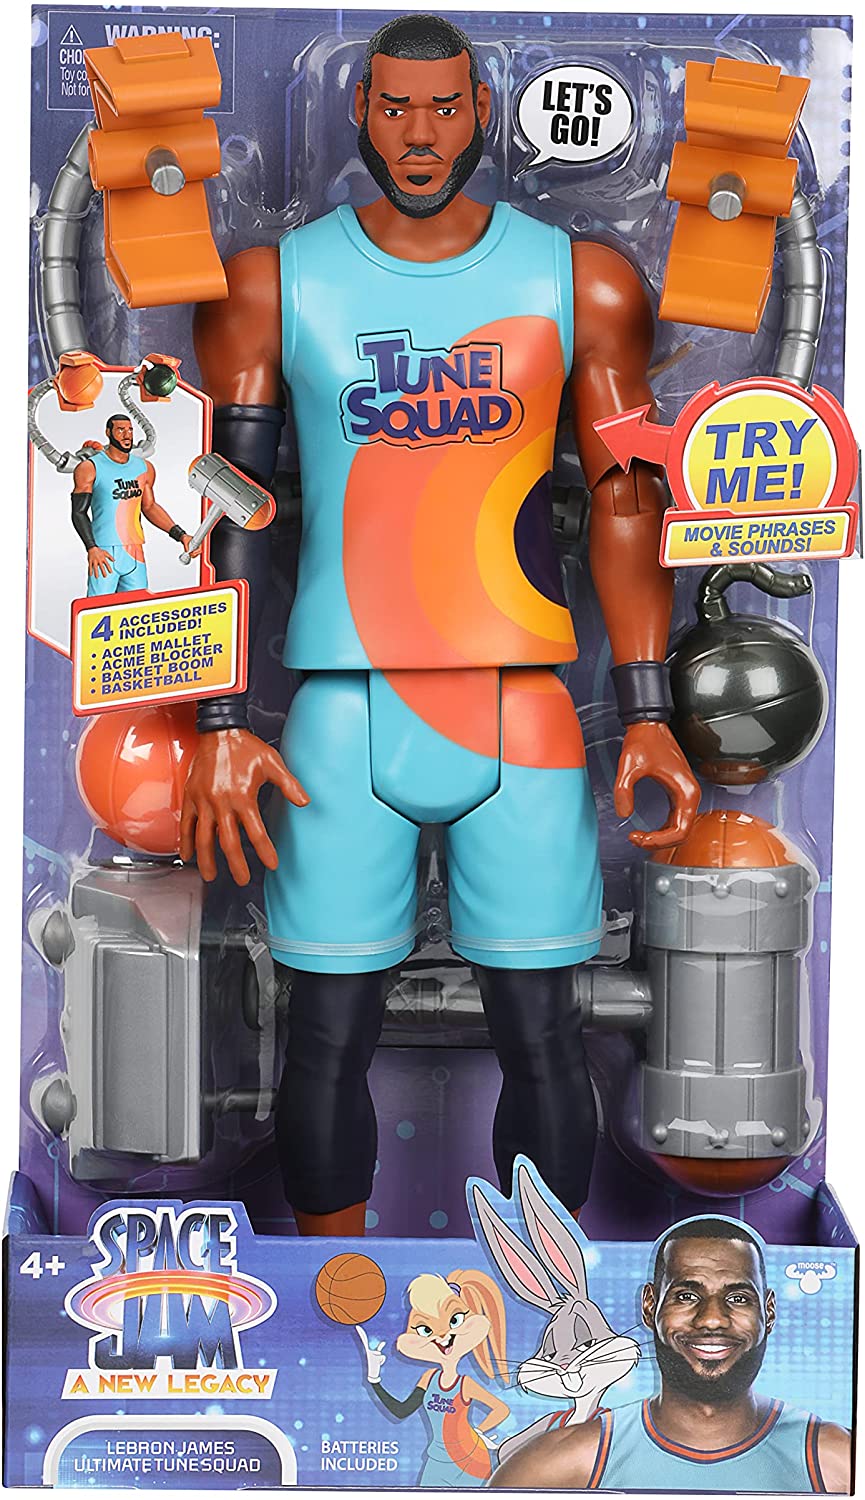 Space Jam 2: A New Legacy Official Collectable Large 12 Inch Articulated Action